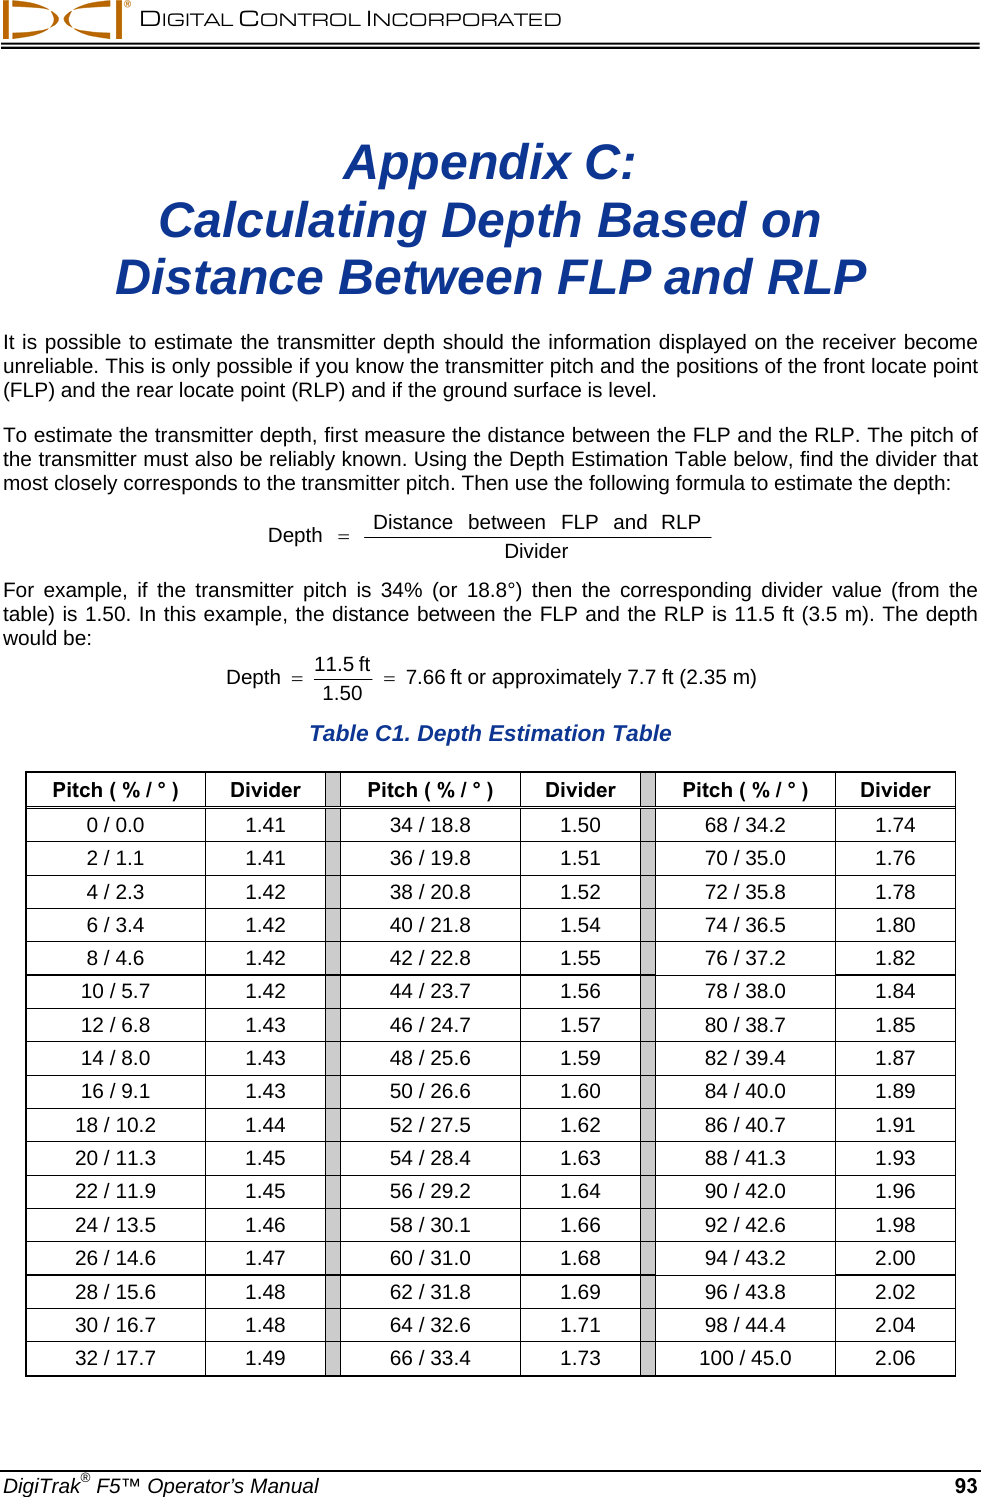  DIGITAL CONTROL INCORPORATED  DigiTrak® F5™ Operator’s Manual 93 Appendix C: Calculating Depth Based on Distance Between FLP and RLP  It is possible to estimate the transmitter depth should the information displayed on the receiver become unreliable. This is only possible if you know the transmitter pitch and the positions of the front locate point (FLP) and the rear locate point (RLP) and if the ground surface is level.  To estimate the transmitter depth, first measure the distance between the FLP and the RLP. The pitch of the transmitter must also be reliably known. Using the Depth Estimation Table below, find the divider that most closely corresponds to the transmitter pitch. Then use the following formula to estimate the depth: DividerRLPandFLPbetweenDistanceDepth  For example, if the transmitter pitch is 34% (or 18.8°) then the corresponding divider value (from the table) is 1.50. In this example, the distance between the FLP and the RLP is 11.5 ft (3.5 m). The depth would be: 7.661.50ft 11.5Depth  ft or approximately 7.7 ft (2.35 m)  Table C1. Depth Estimation Table Pitch ( % / ° )  Divider    Pitch ( % / ° )  Divider  Pitch ( % / ° )  Divider 0 / 0.0  1.41    34 / 18.8  1.50  68 / 34.2  1.74 2 / 1.1  1.41    36 / 19.8  1.51  70 / 35.0  1.76 4 / 2.3  1.42    38 / 20.8  1.52  72 / 35.8  1.78 6 / 3.4  1.42    40 / 21.8  1.54  74 / 36.5  1.80 8 / 4.6  1.42    42 / 22.8  1.55  76 / 37.2  1.82 10 / 5.7  1.42    44 / 23.7  1.56  78 / 38.0  1.84 12 / 6.8  1.43    46 / 24.7  1.57  80 / 38.7  1.85 14 / 8.0  1.43    48 / 25.6  1.59  82 / 39.4  1.87 16 / 9.1  1.43    50 / 26.6  1.60  84 / 40.0  1.89 18 / 10.2  1.44    52 / 27.5  1.62  86 / 40.7  1.91 20 / 11.3  1.45    54 / 28.4  1.63  88 / 41.3  1.93 22 / 11.9  1.45    56 / 29.2  1.64  90 / 42.0  1.96 24 / 13.5  1.46    58 / 30.1  1.66  92 / 42.6  1.98 26 / 14.6  1.47    60 / 31.0  1.68  94 / 43.2  2.00 28 / 15.6  1.48    62 / 31.8  1.69  96 / 43.8  2.02 30 / 16.7  1.48    64 / 32.6  1.71  98 / 44.4  2.04 32 / 17.7  1.49    66 / 33.4  1.73  100 / 45.0  2.06  